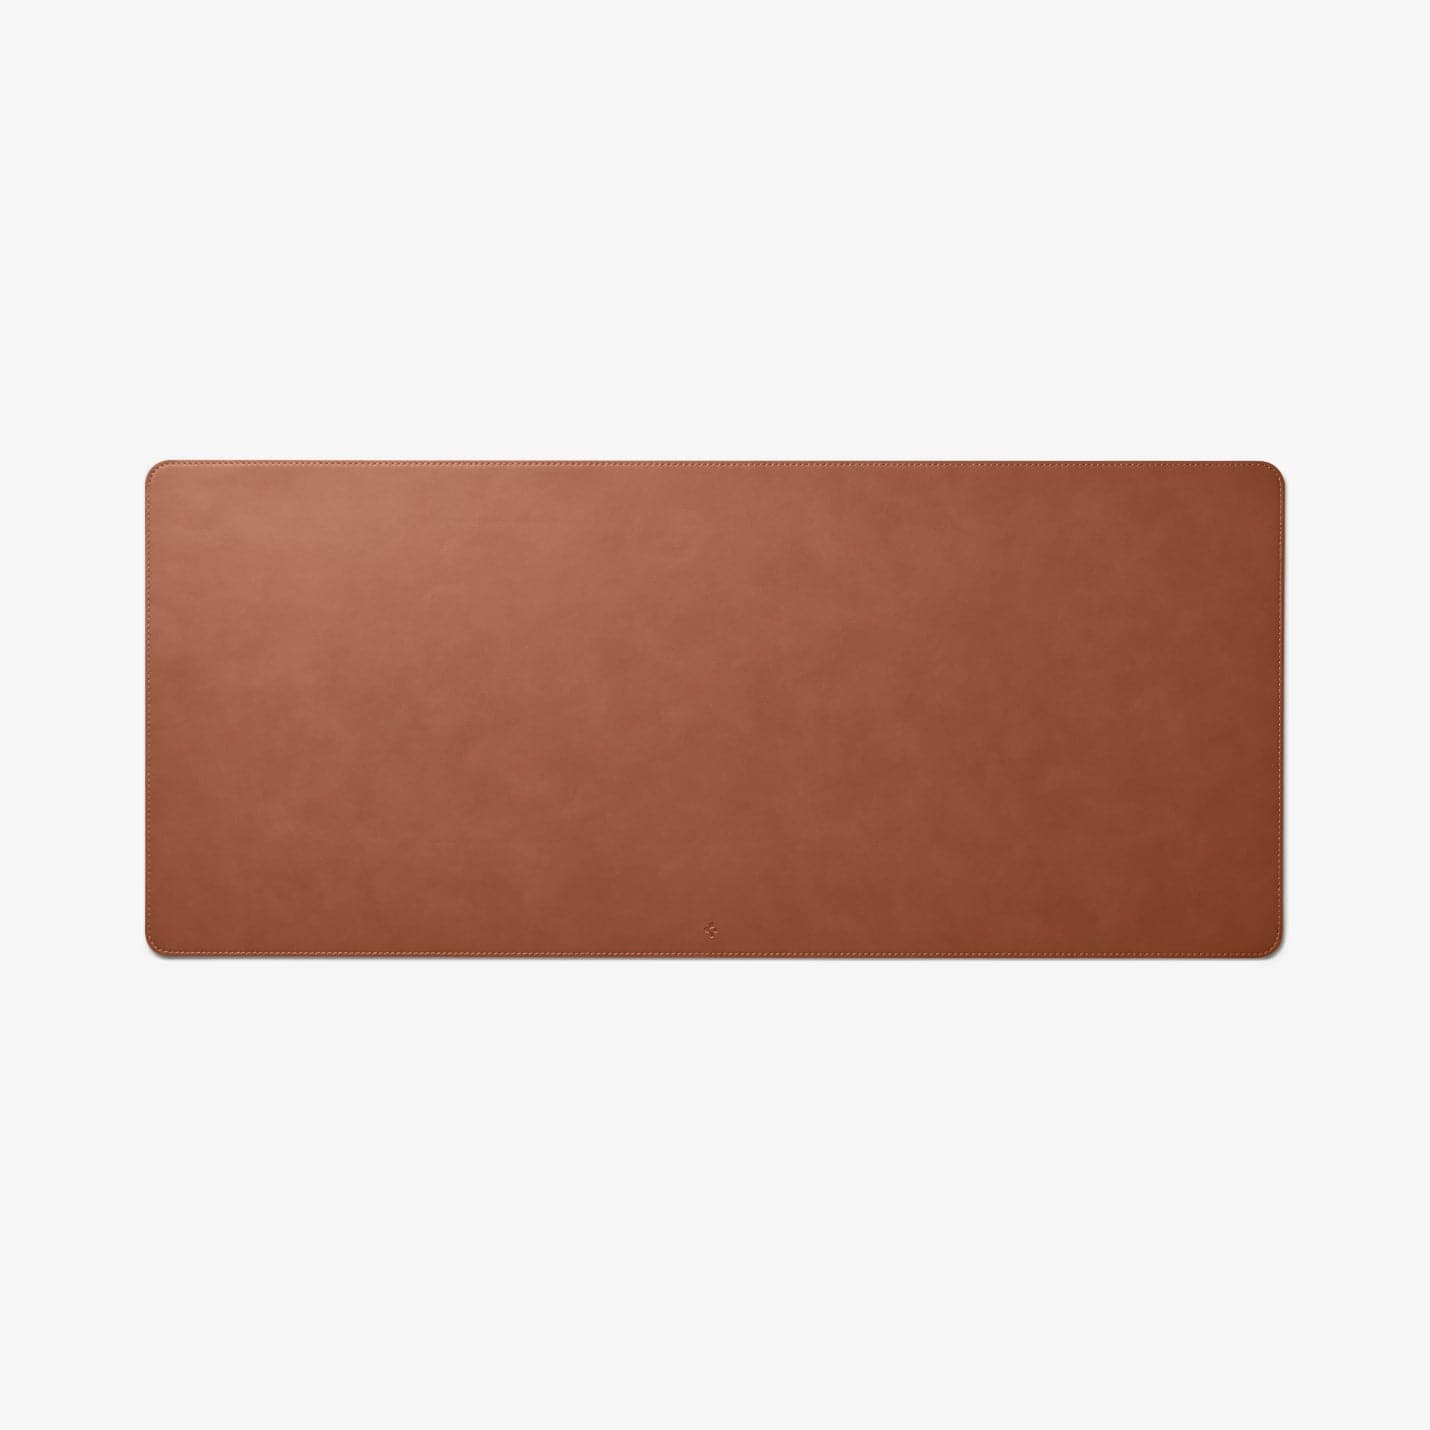 APP04763 - LD302 Desk Pad in brown showing the front